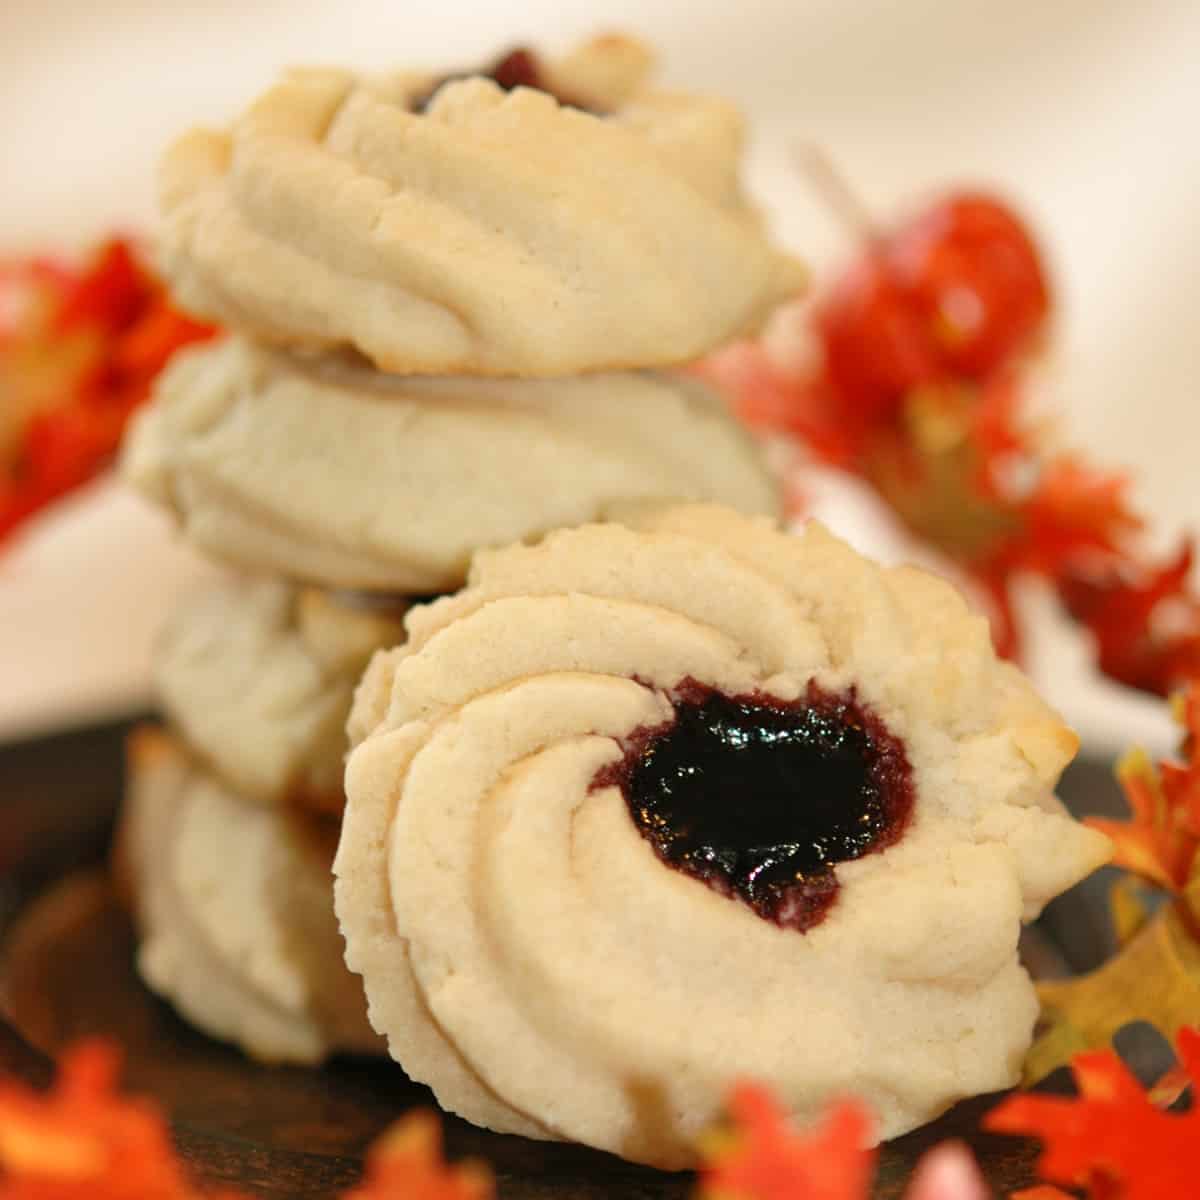 Shortbread cookie with jam with fall leaves around a stack of baked shortbread cookies with jam.